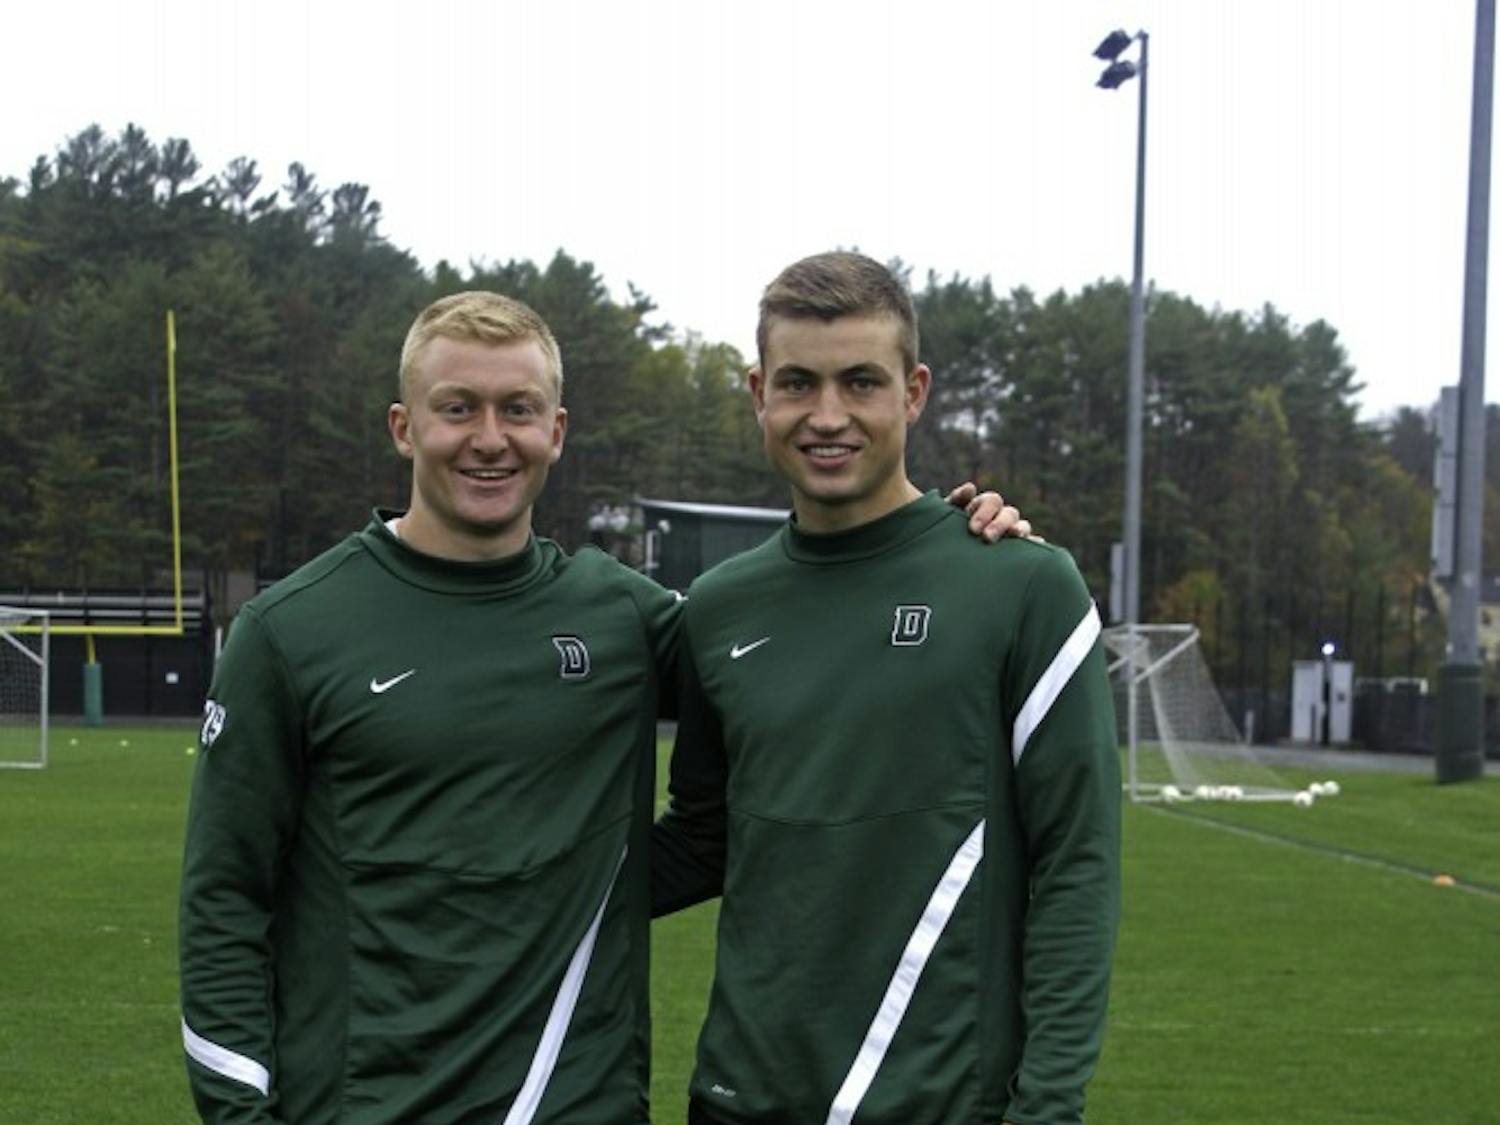 The Danilack brothers, Hugh ’15 and Matt ’18, are keys to the soccer team’s success.